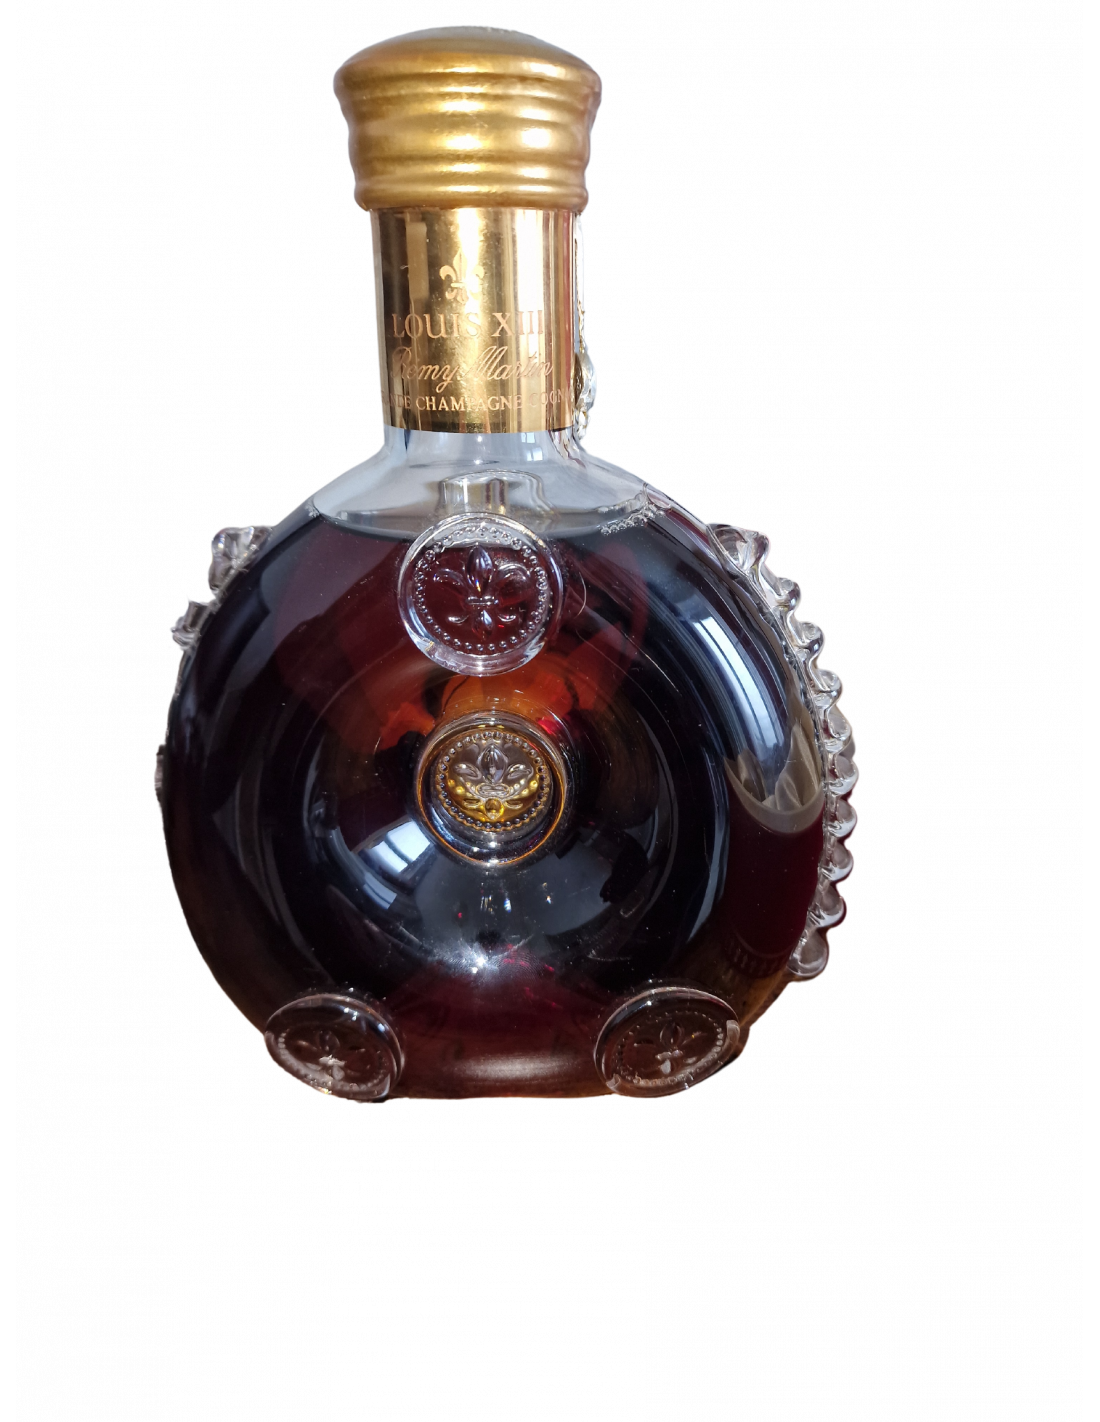 Remy Martin Louis XIII - Grande Champagne Cognac (full set) - World Wine &  Whisky